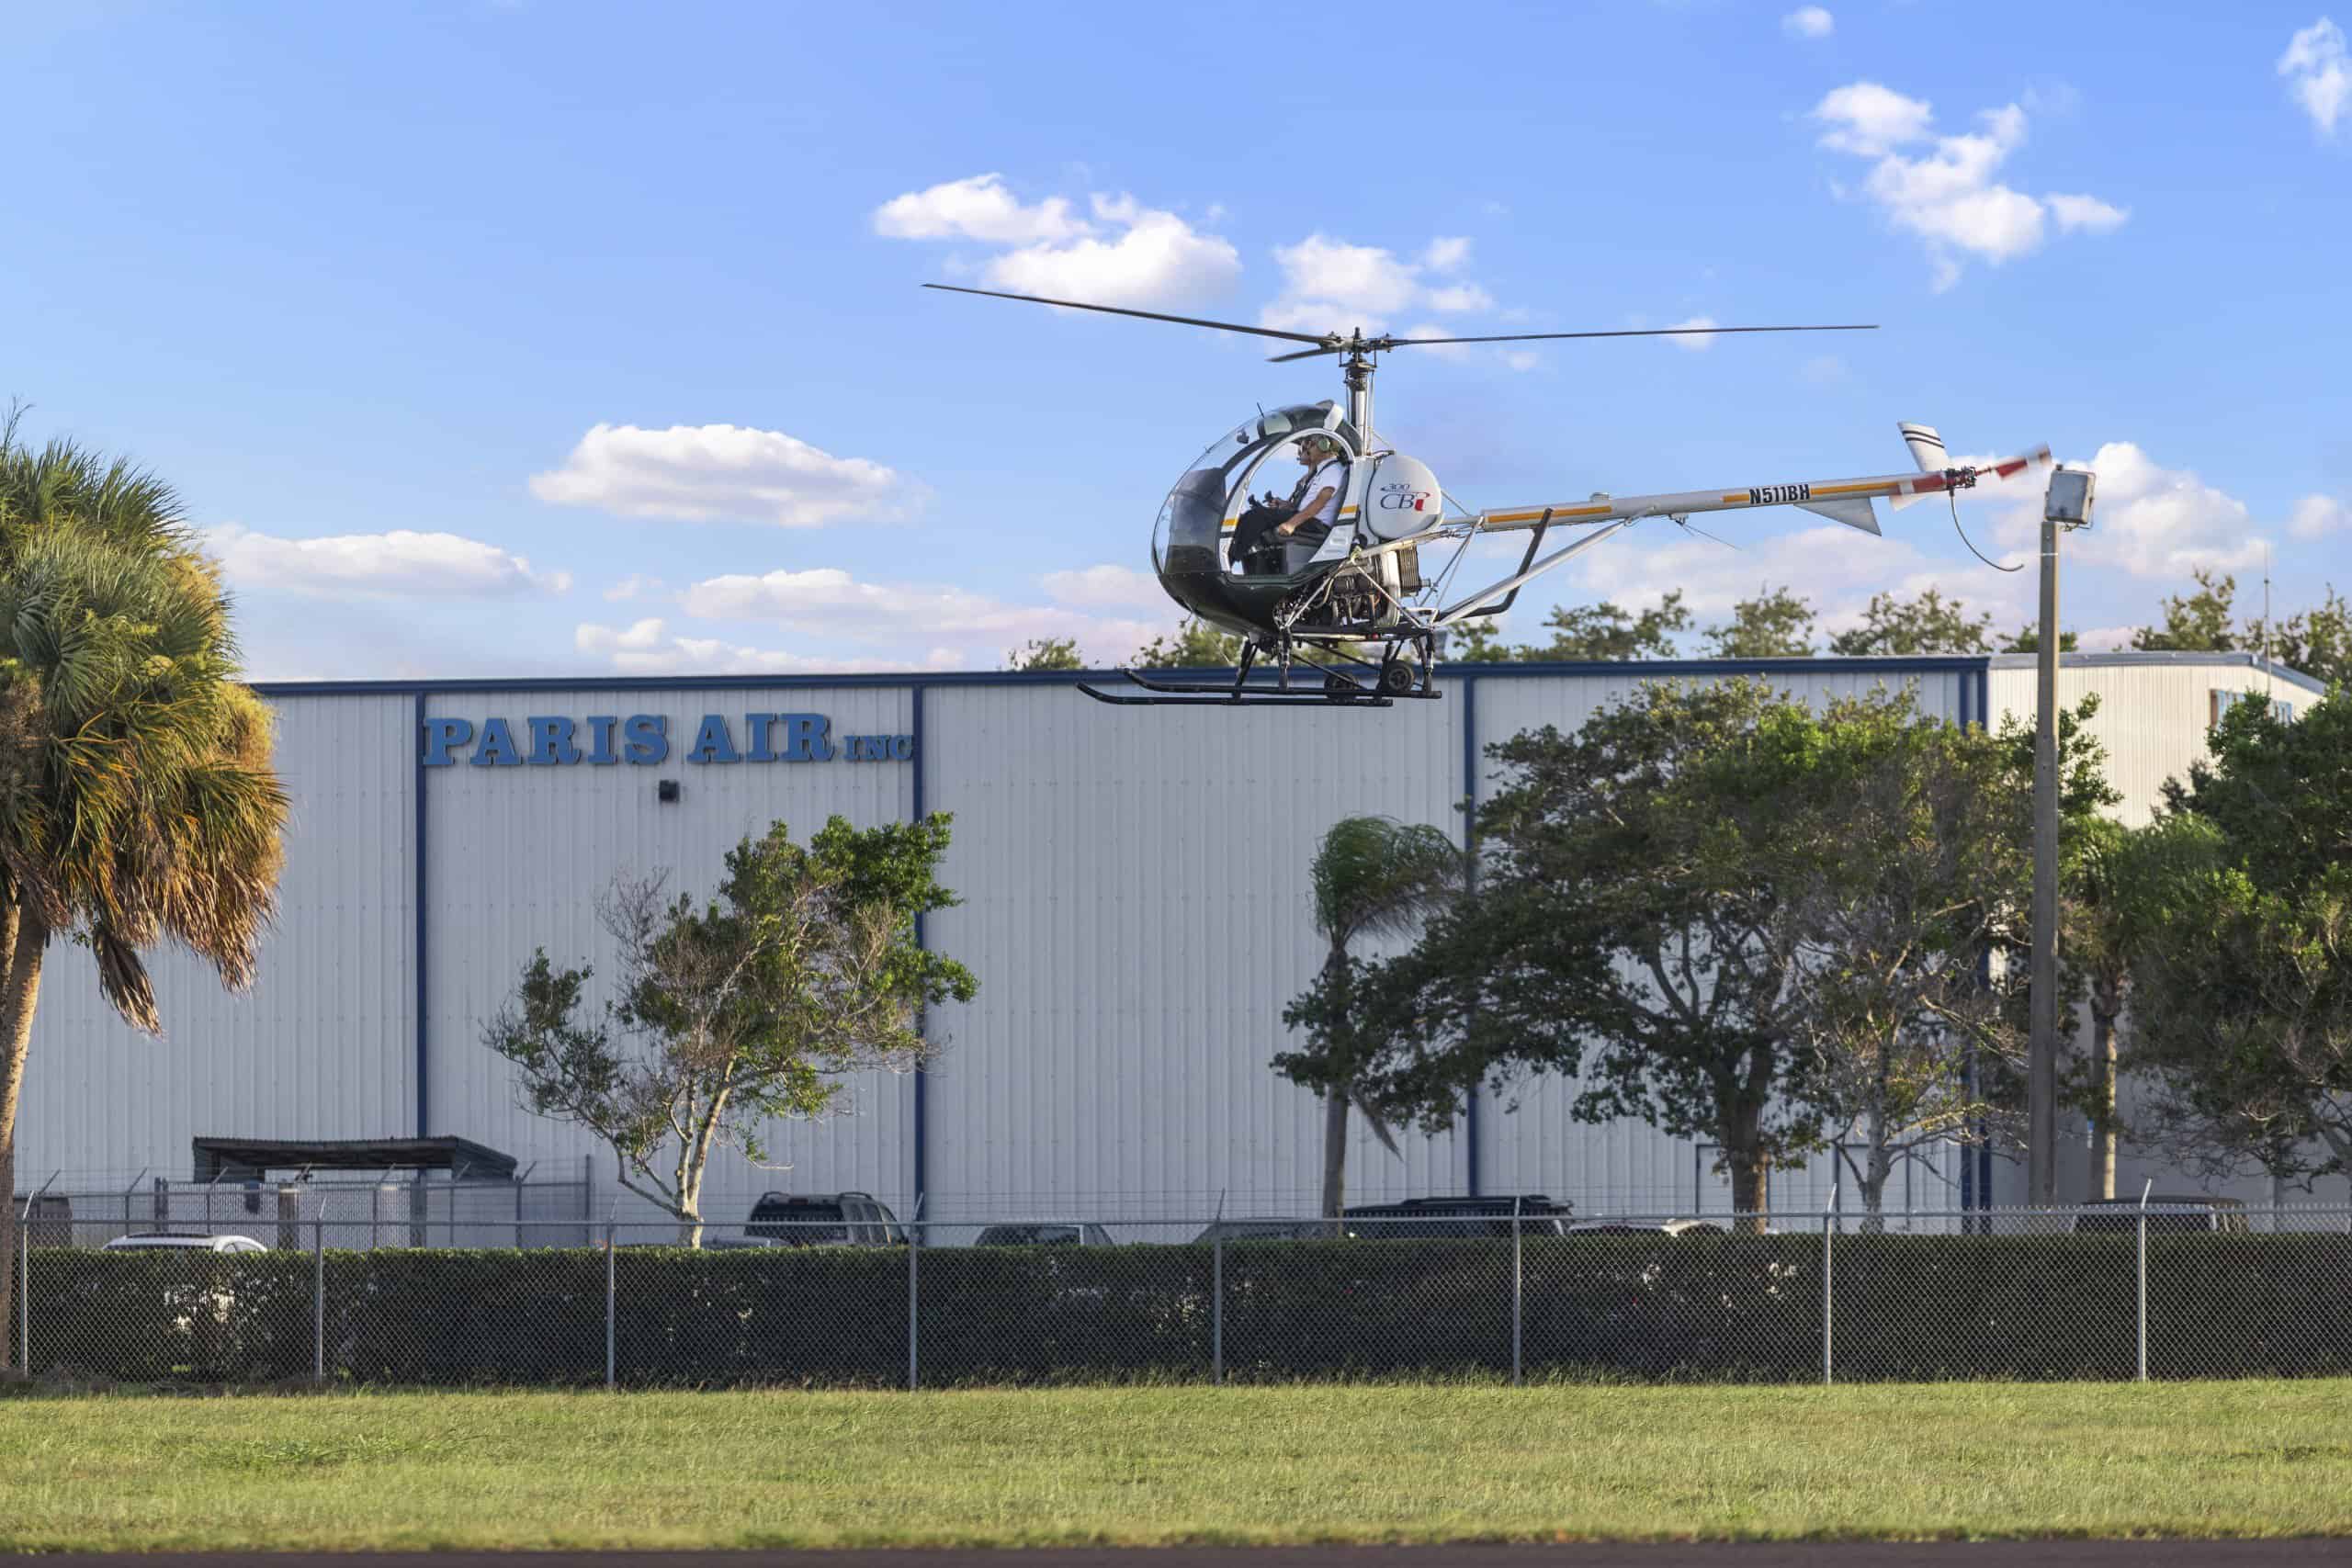 Photo of a helicopter in the air in front of the Paris Air building